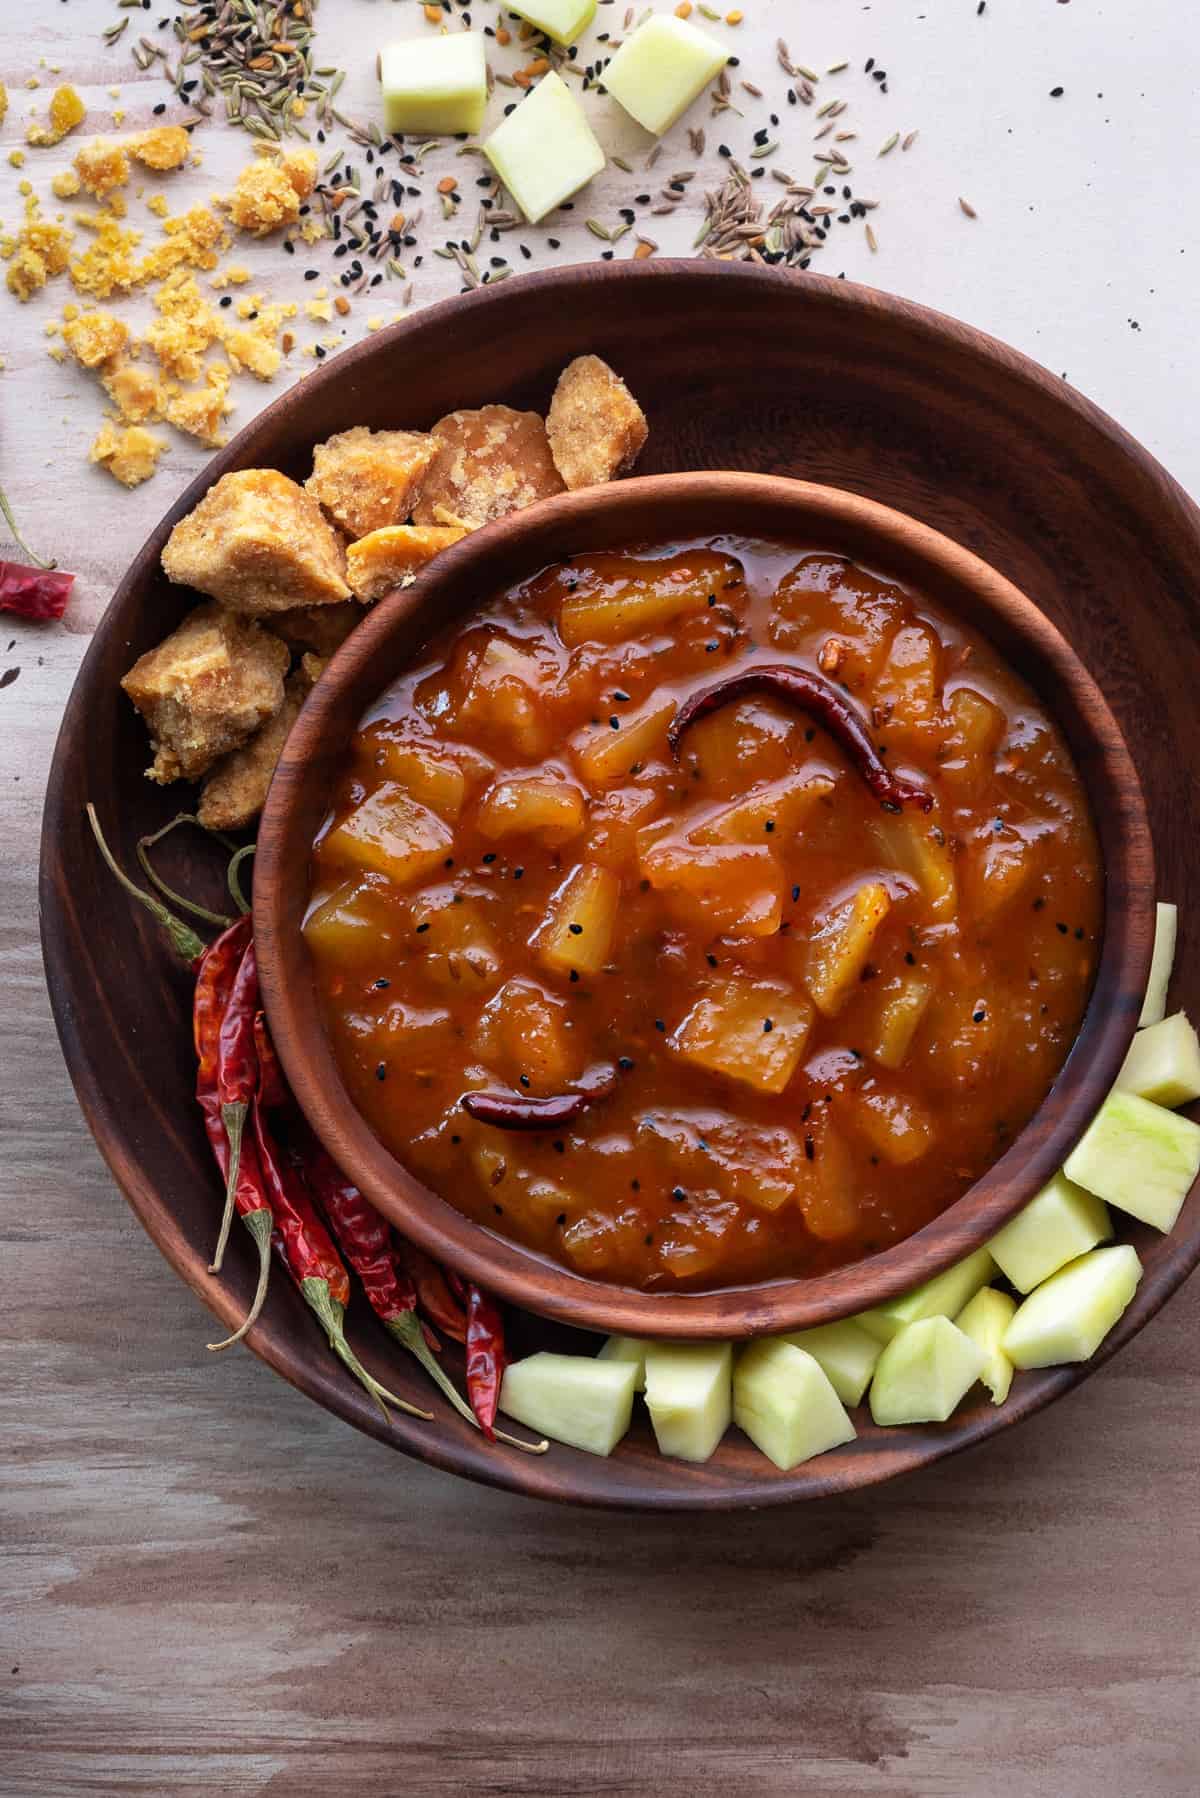 Aam ki launji in wooden bowl with jaggery, red chillies and raw mangoes spread around.